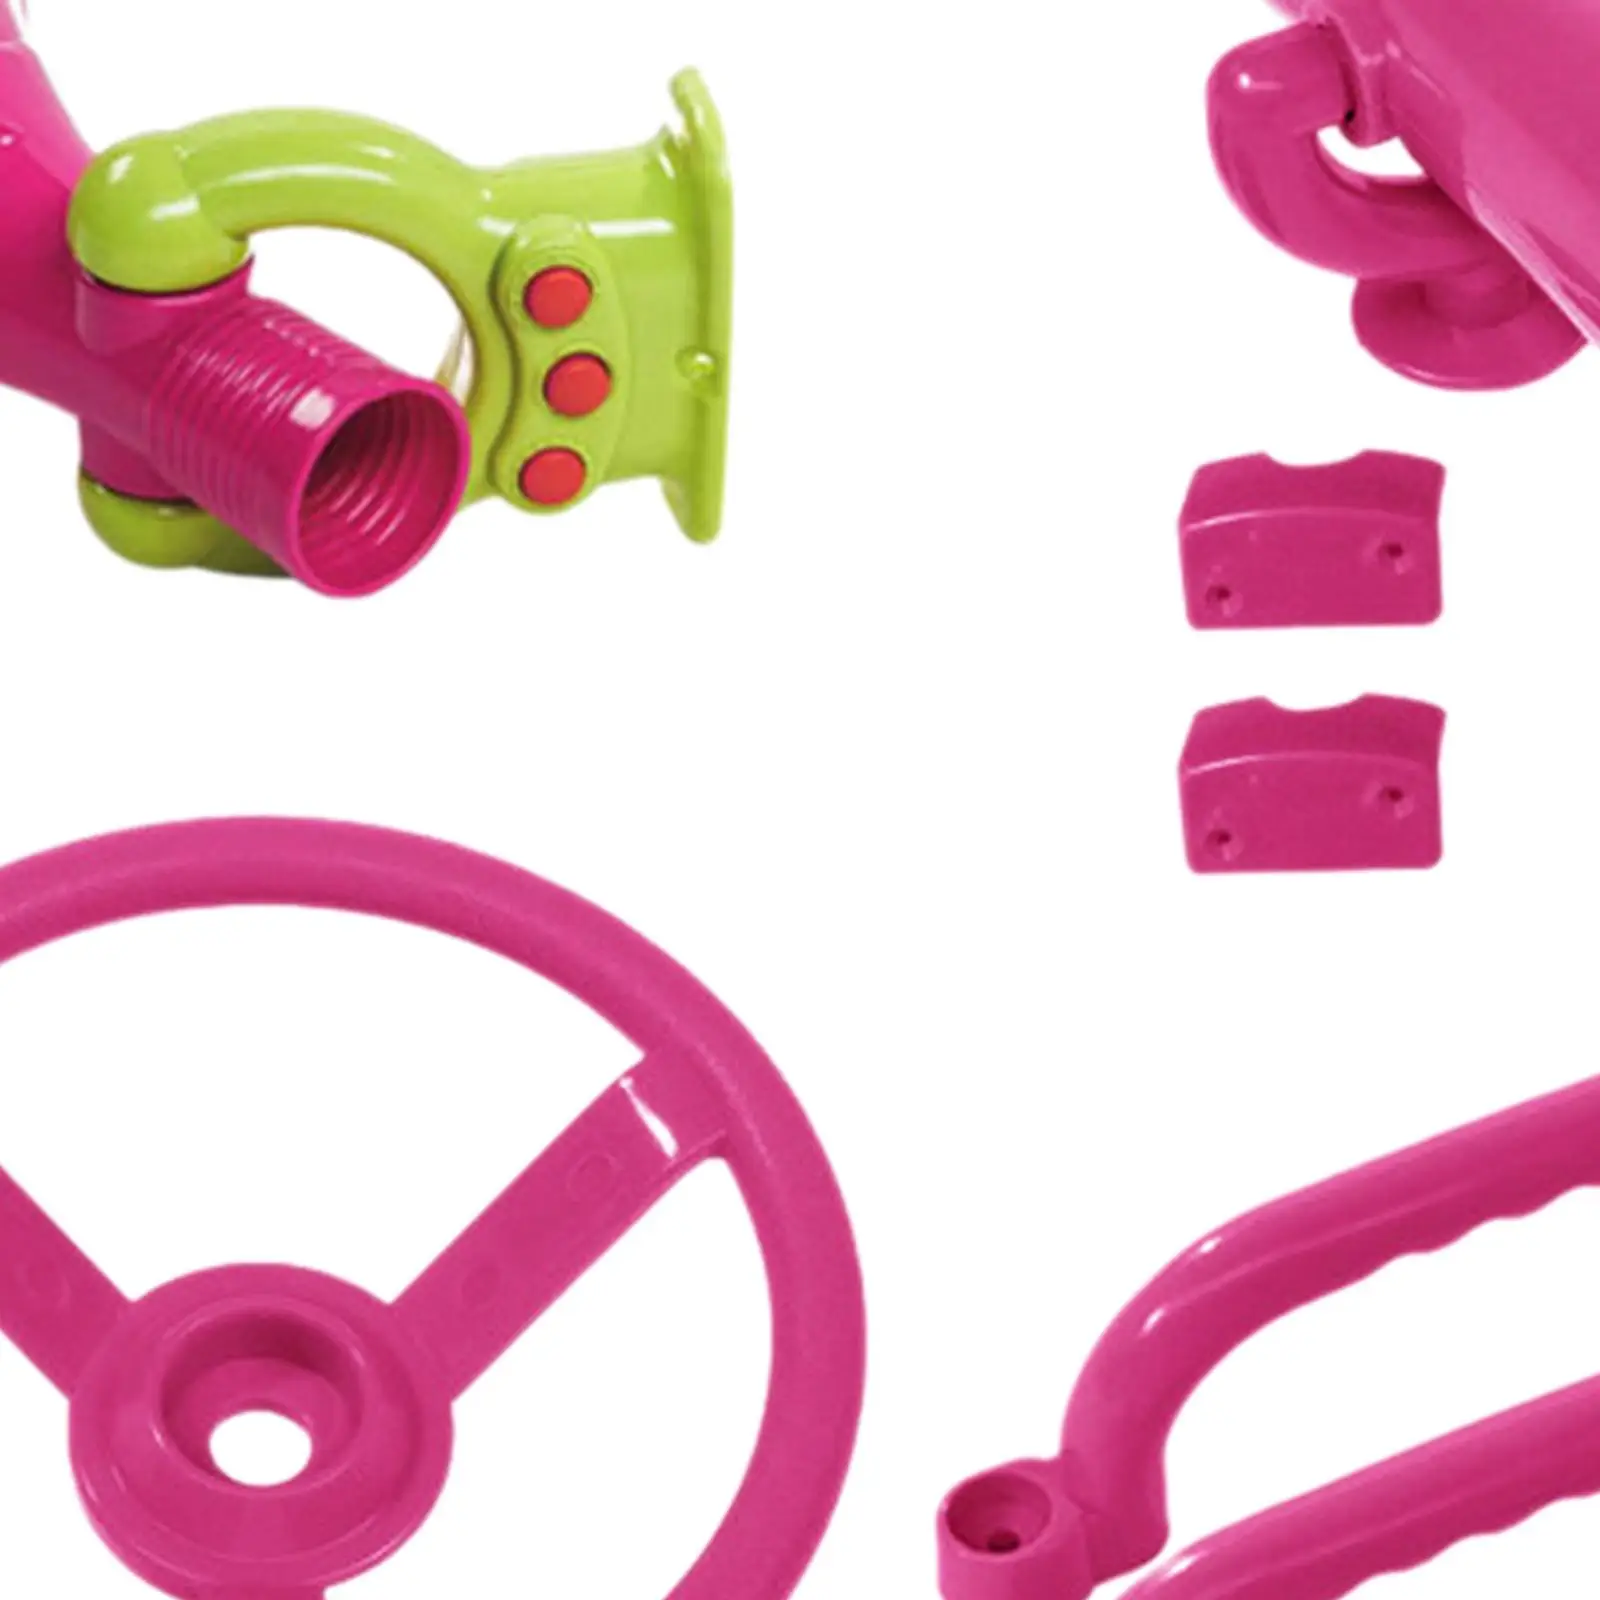 4Pcs Playground Accessories,Pirate Ship Wheel for Kids,Pink Outdoor Playground Accessories for Treehouse,Outdoor Playhouse